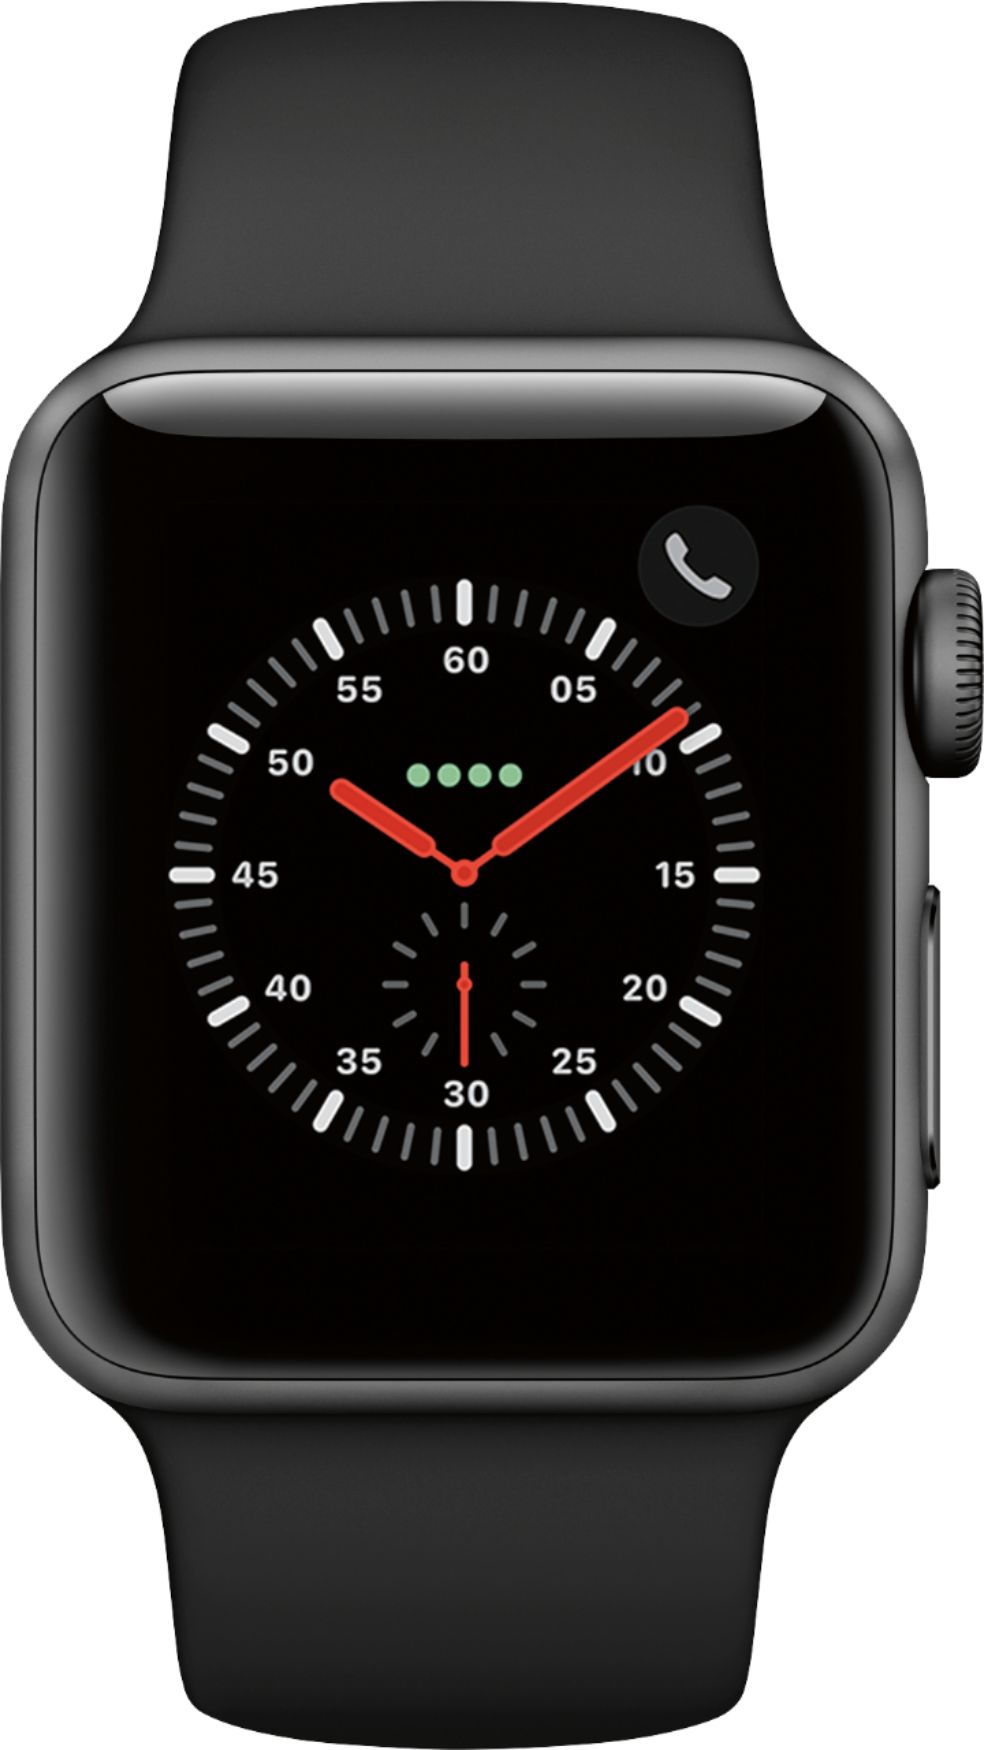  Apple Watch Series 3 [GPS 38mm] Smart Watch w/Space Gray  Aluminum Case & Black Sport Band. Fitness & Activity Tracker, Heart Rate  Monitor, Retina Display, Water Resistant : Electronics